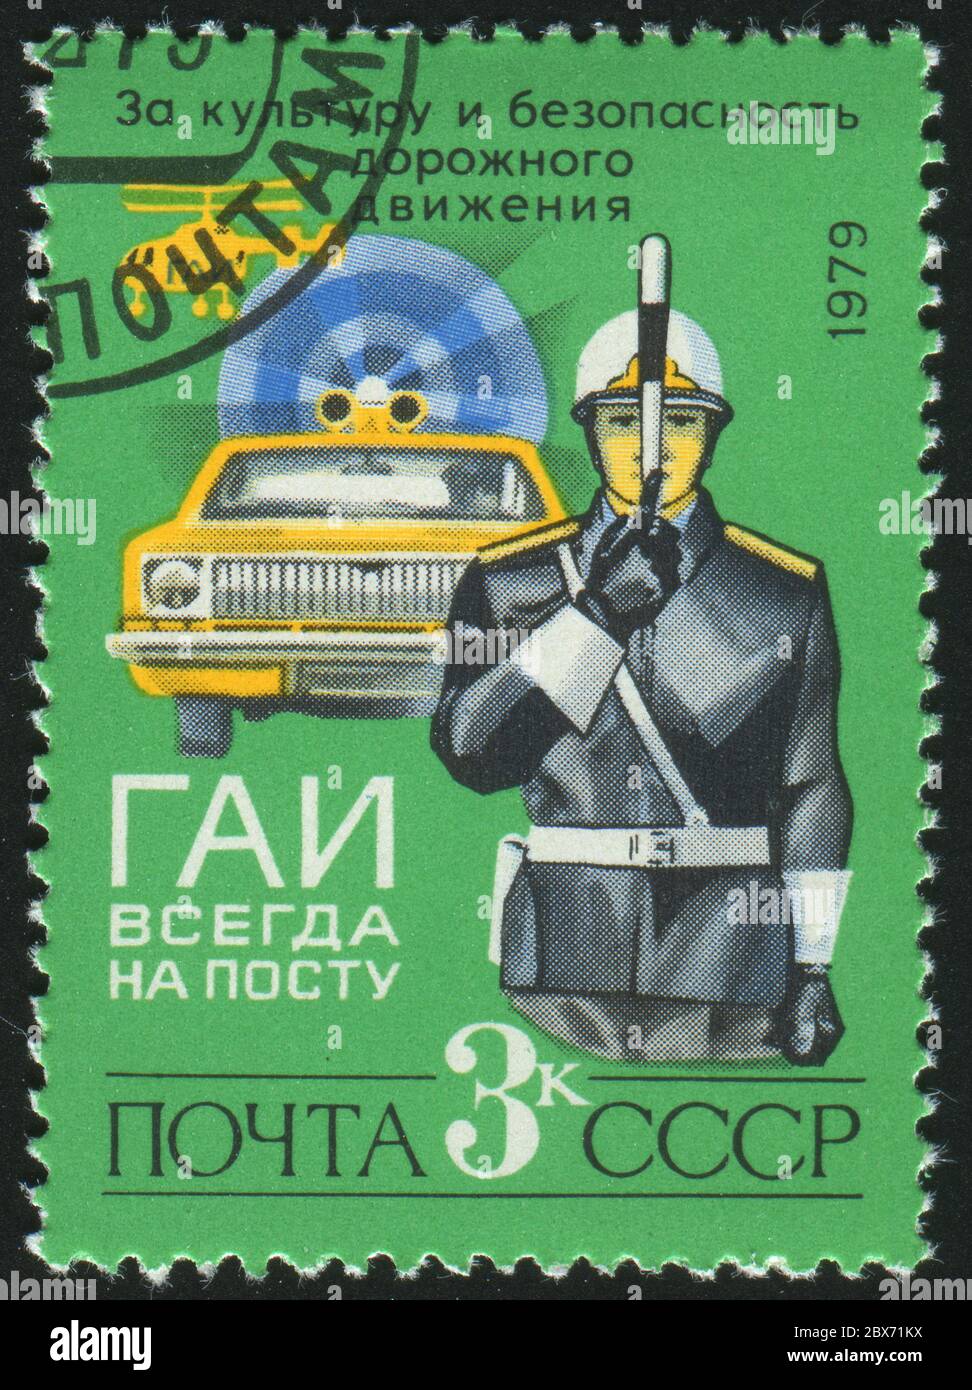 RUSSIA - CIRCA 1979: stamp printed by Russia, shows Policeman, Patrol Car, Helicopter, circa 1979. Stock Photo